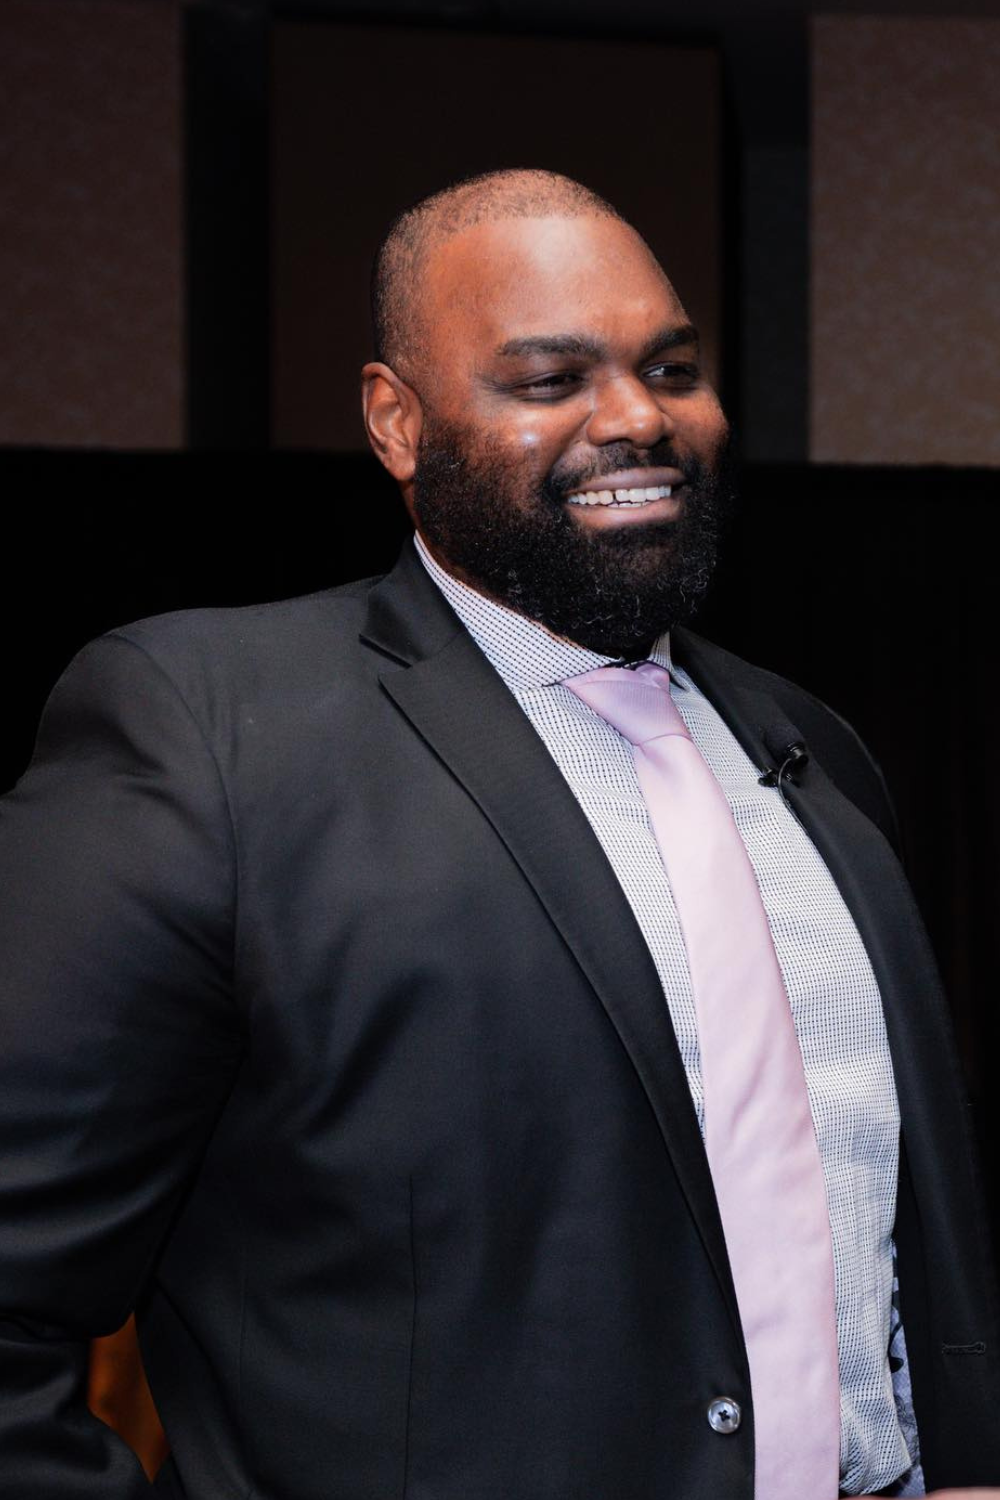 The Former American Football Offensive Tackle Michael Oher